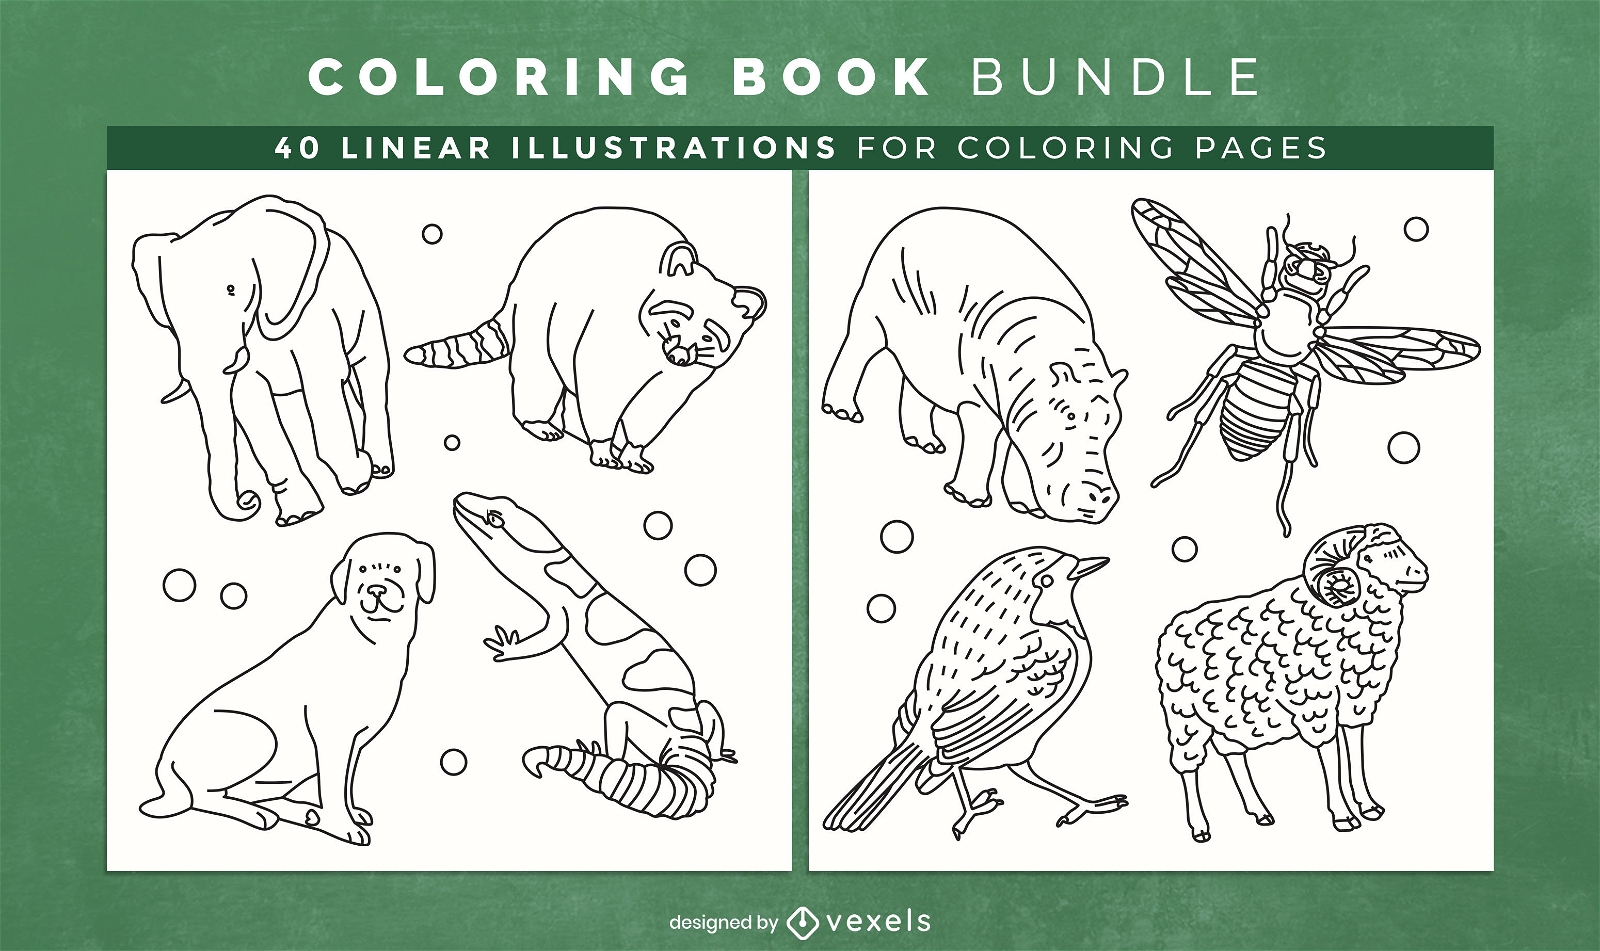 Line art animal coloring book design pages